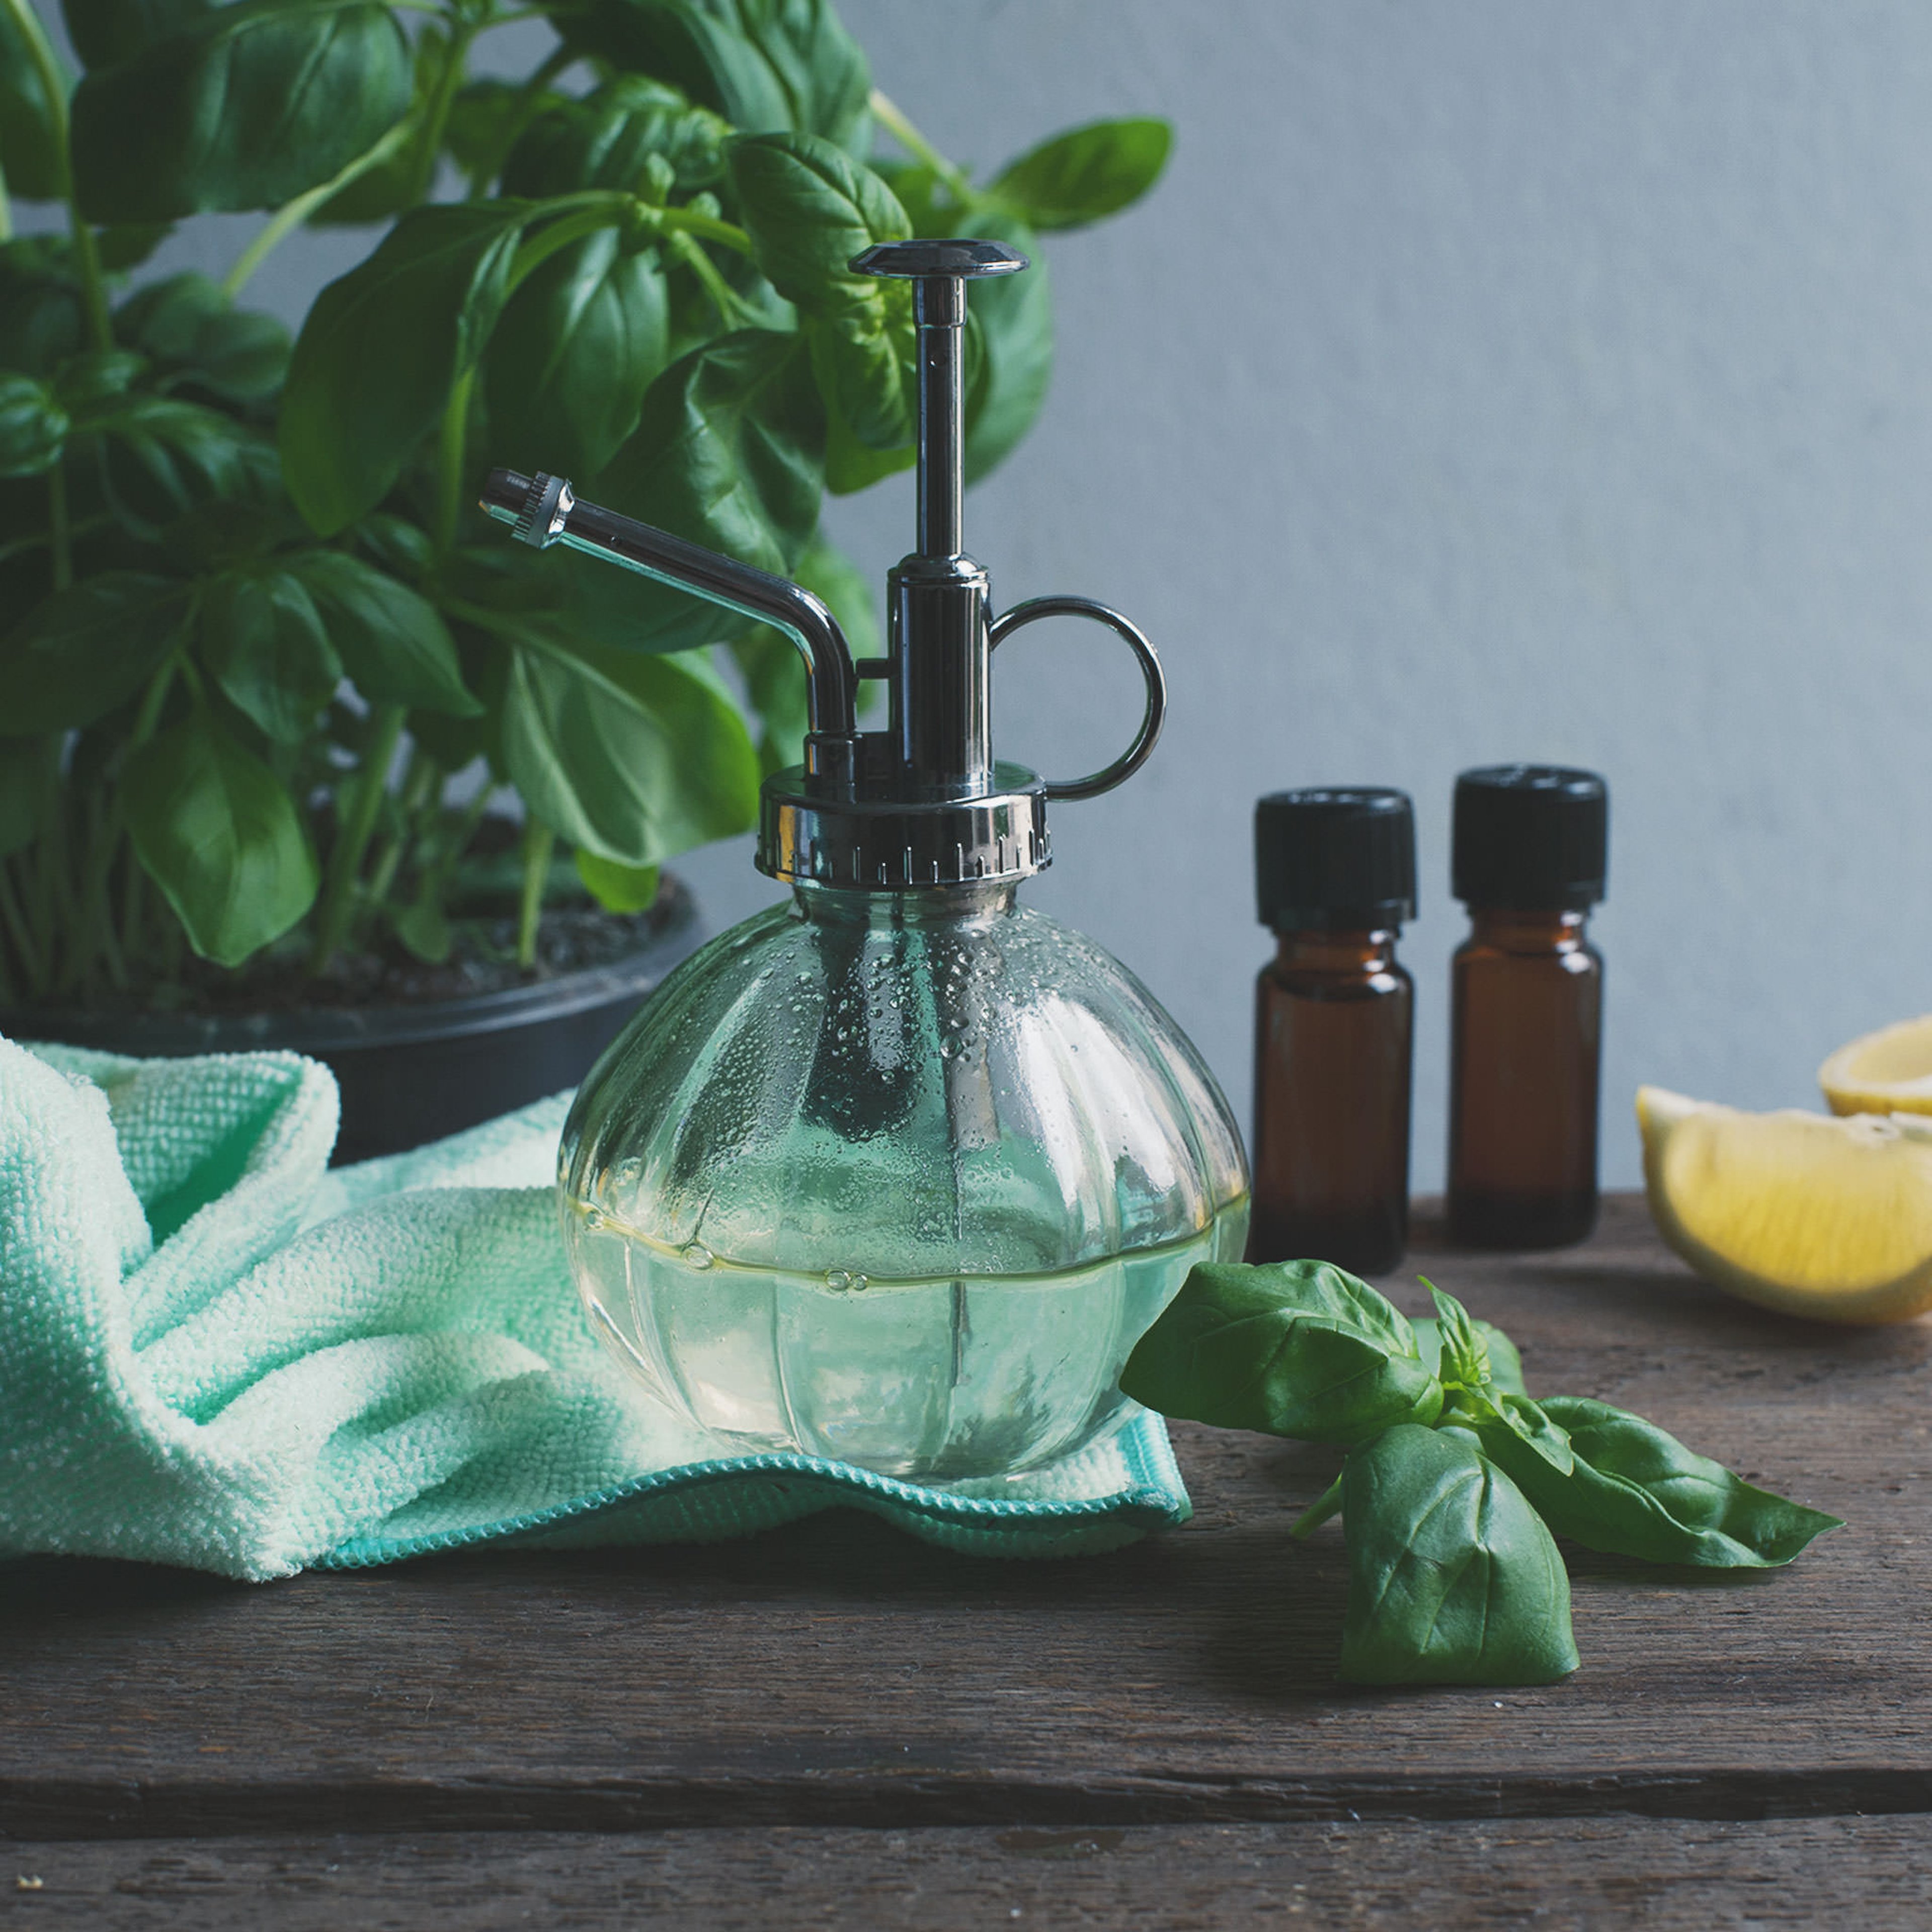 5 All-Natural Kitchen Cleaners